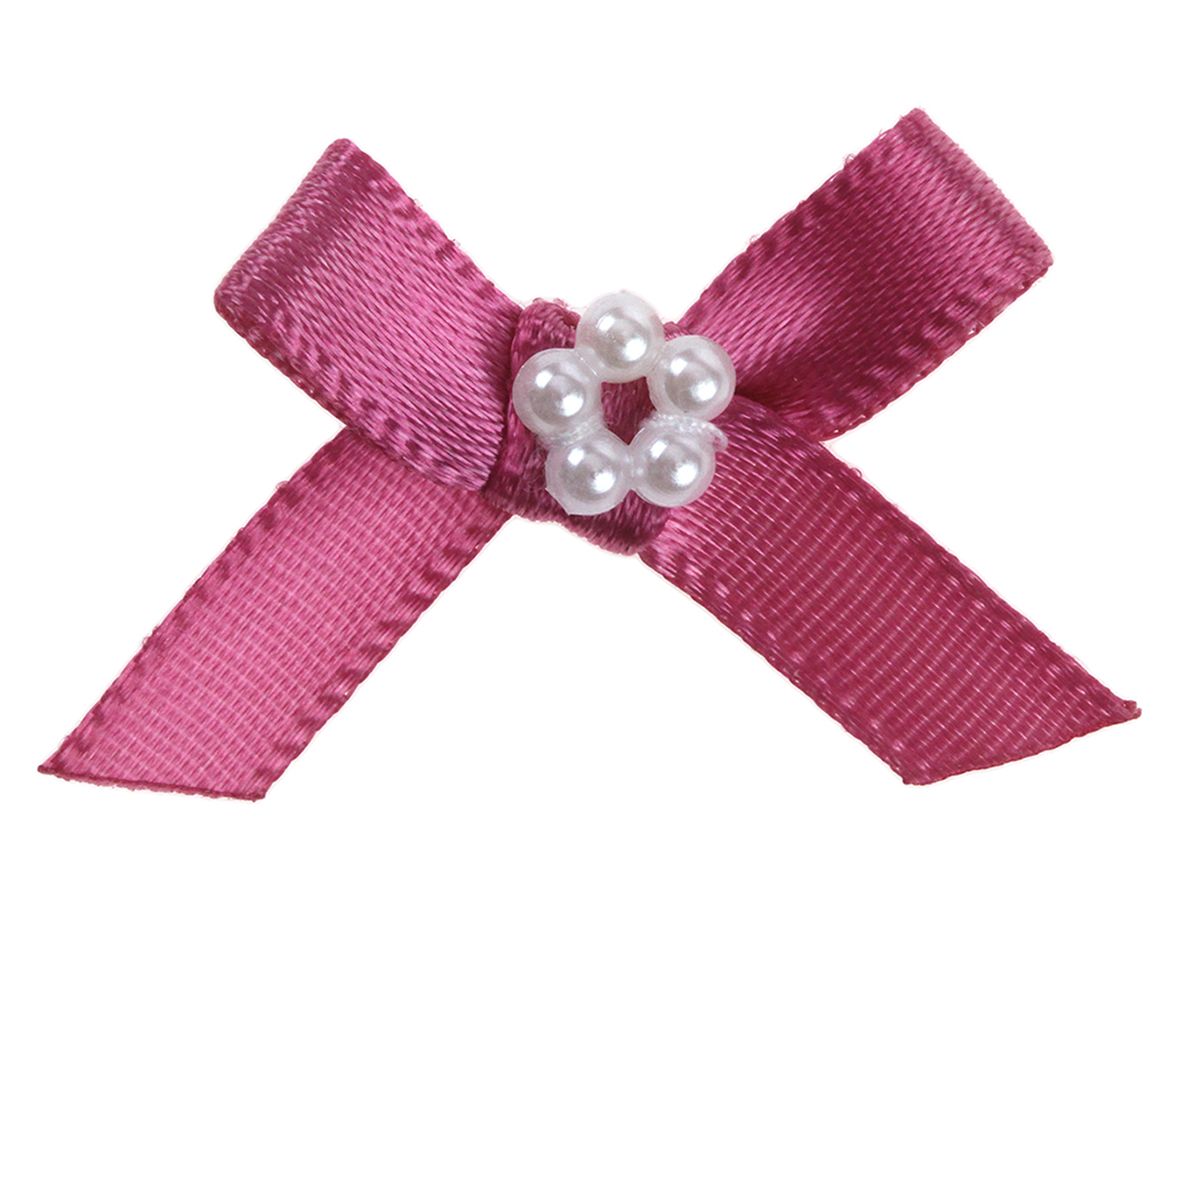 Ribbon Bow and Pearl / Diamante Cluster category image